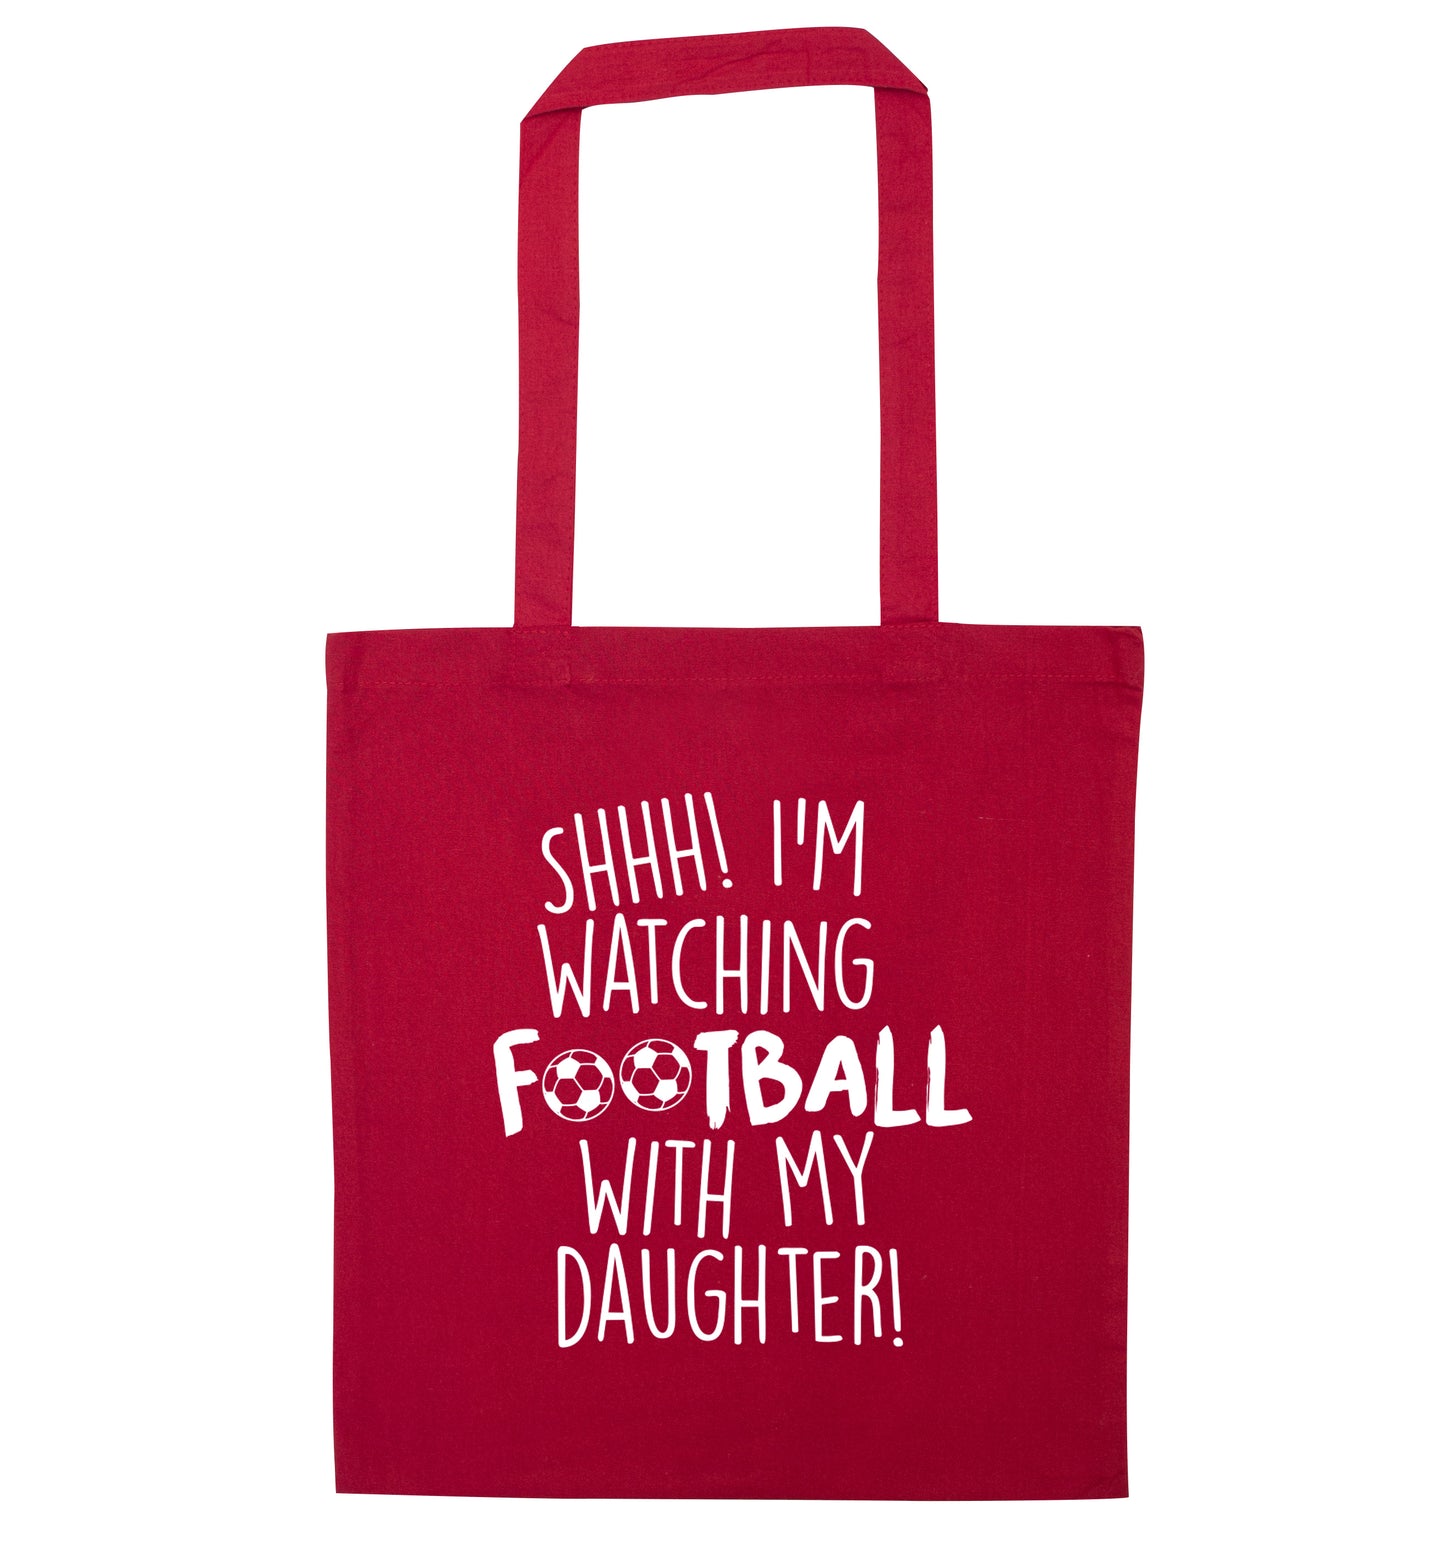 Shhh I'm watching football with my daughter red tote bag